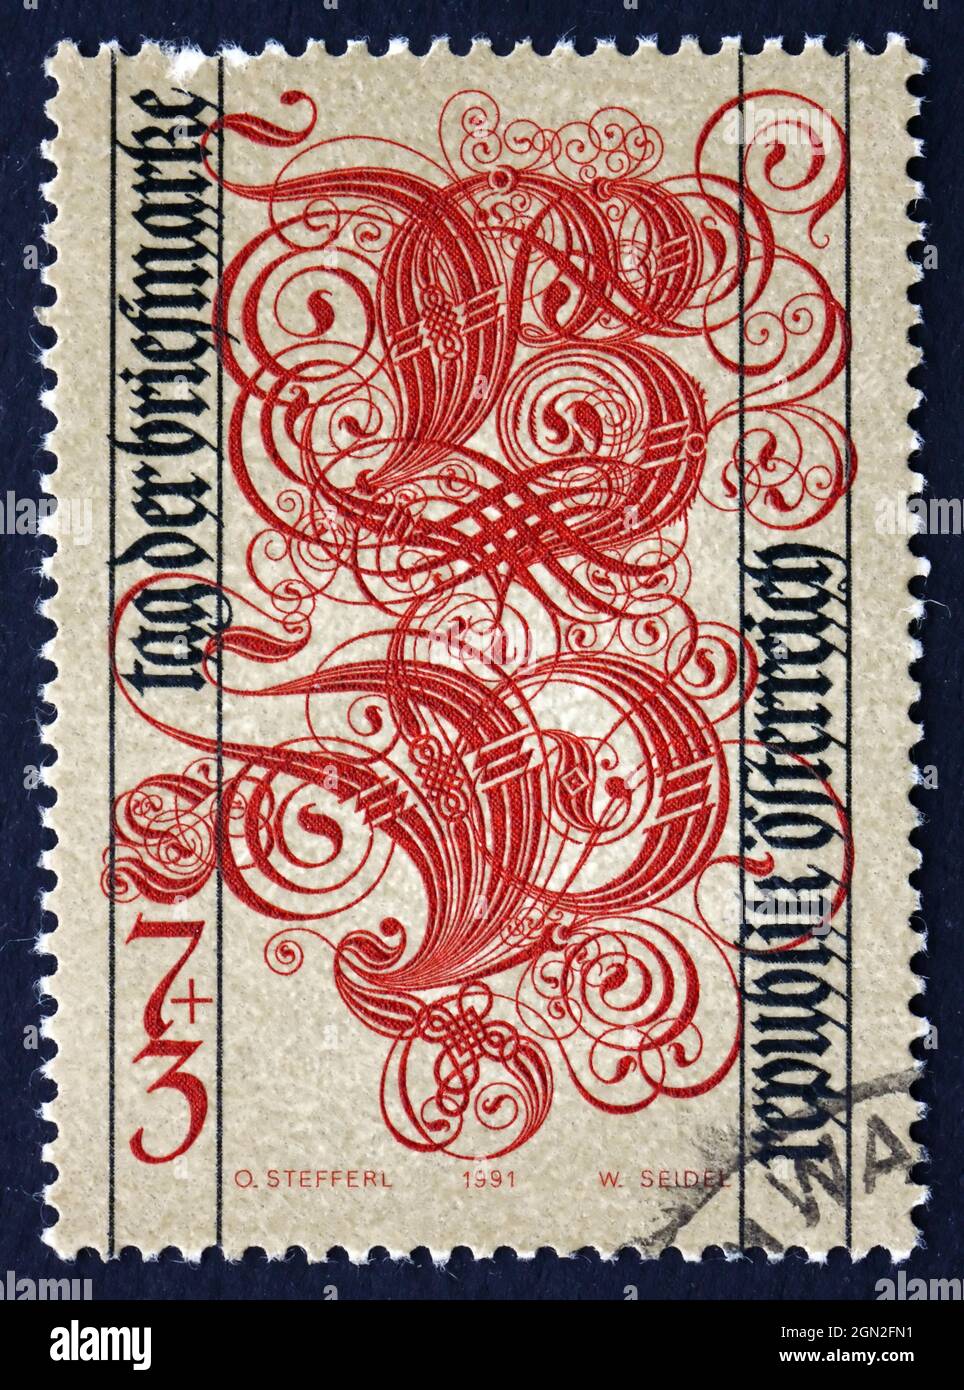 AUSTRIA - CIRCA 1991: a stamp printed in the Austria shows Letters B for Briefmarke and P for Philatelie, Stamp Day, circa 1991 Stock Photo